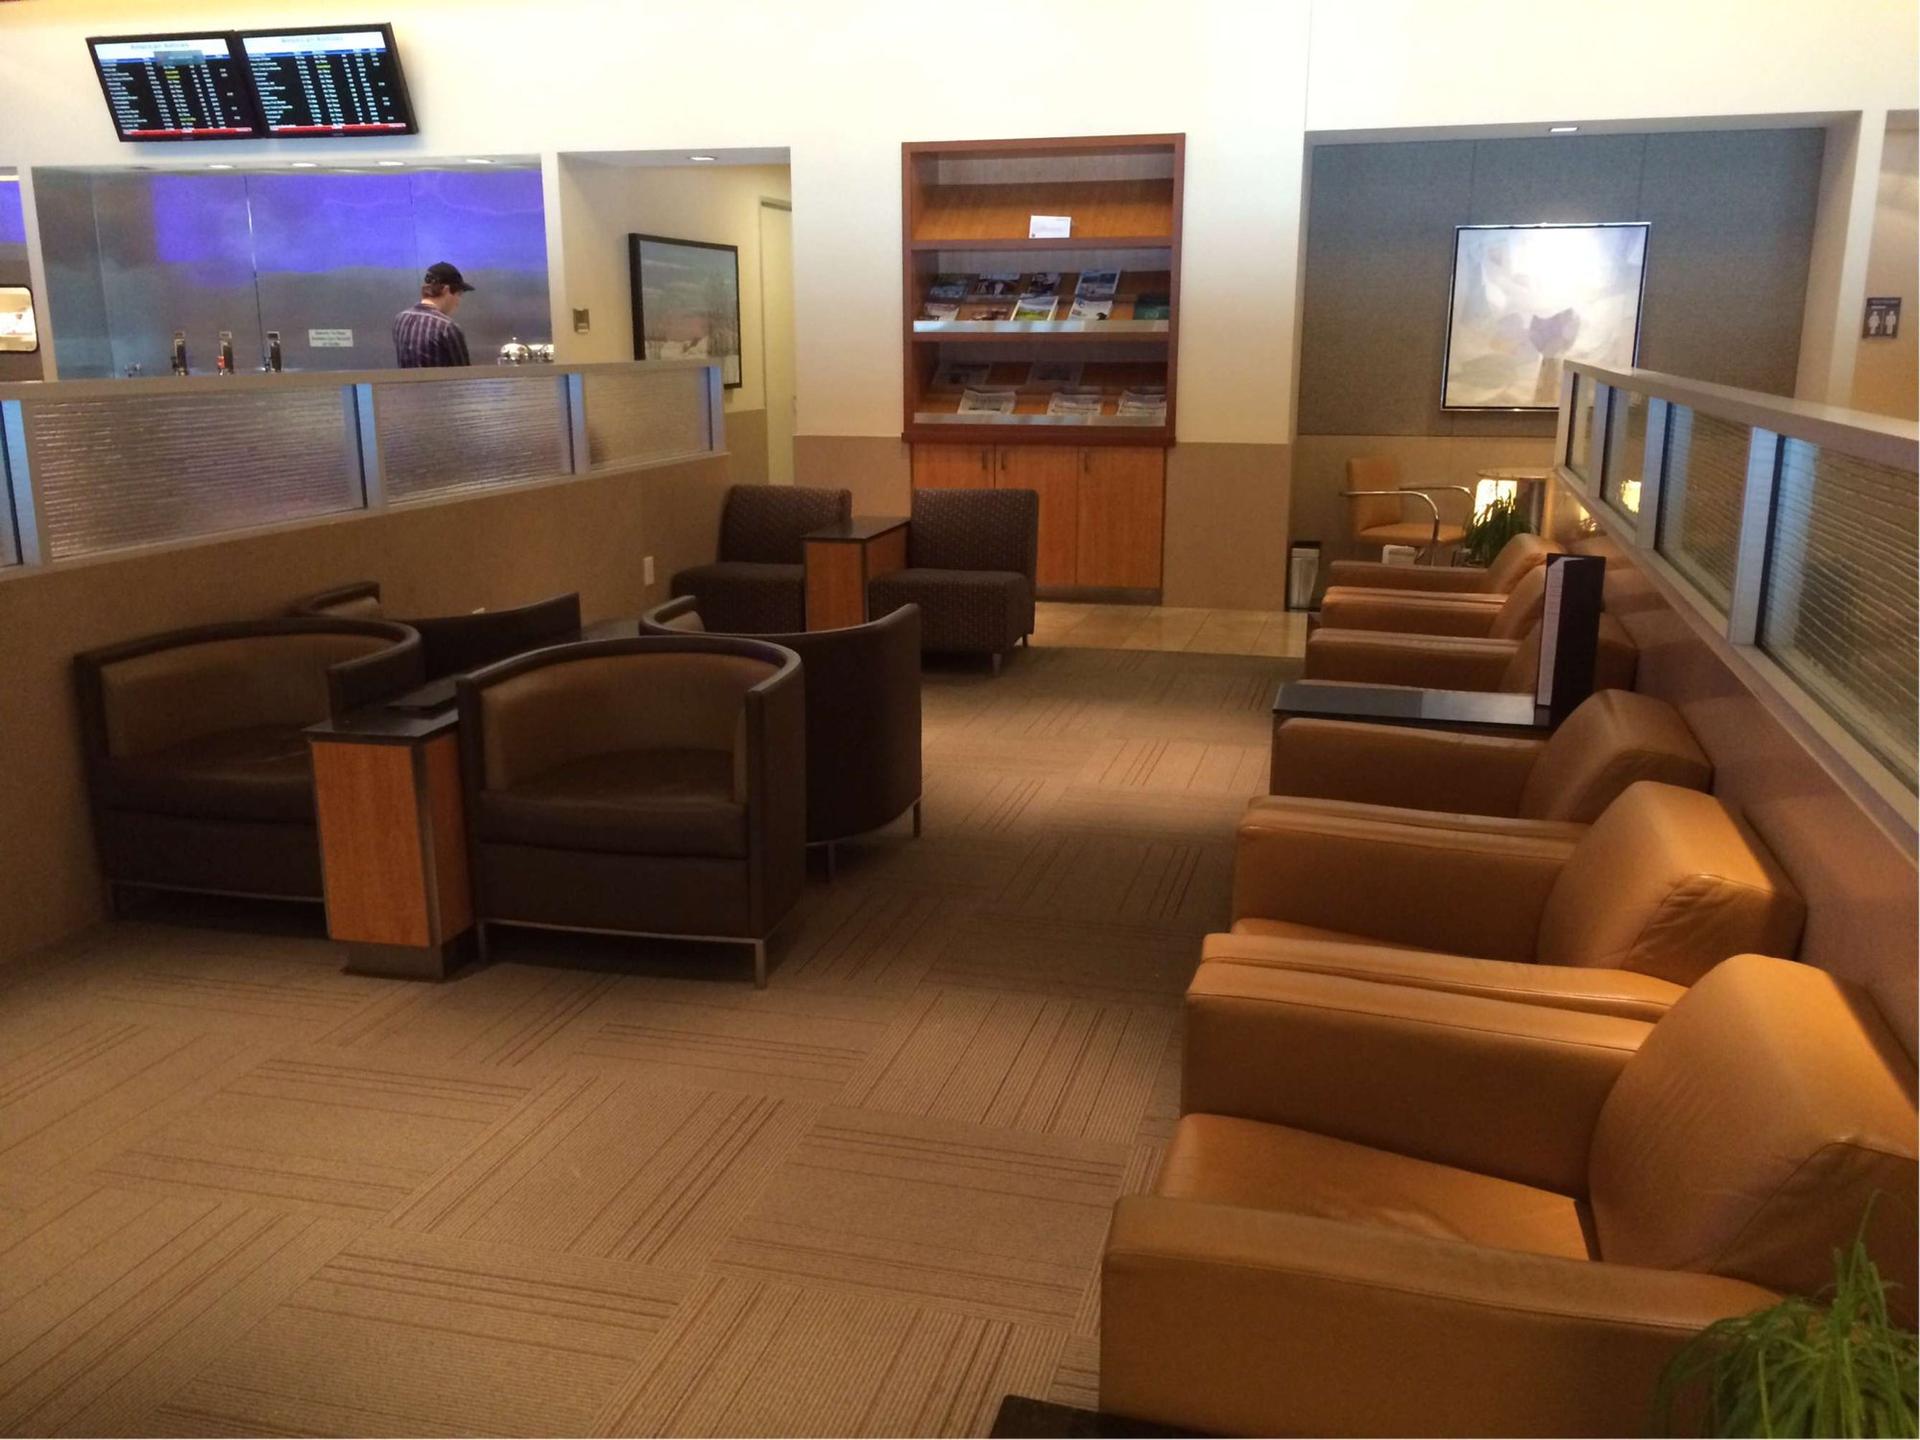 American Airlines Admirals Club image 2 of 31